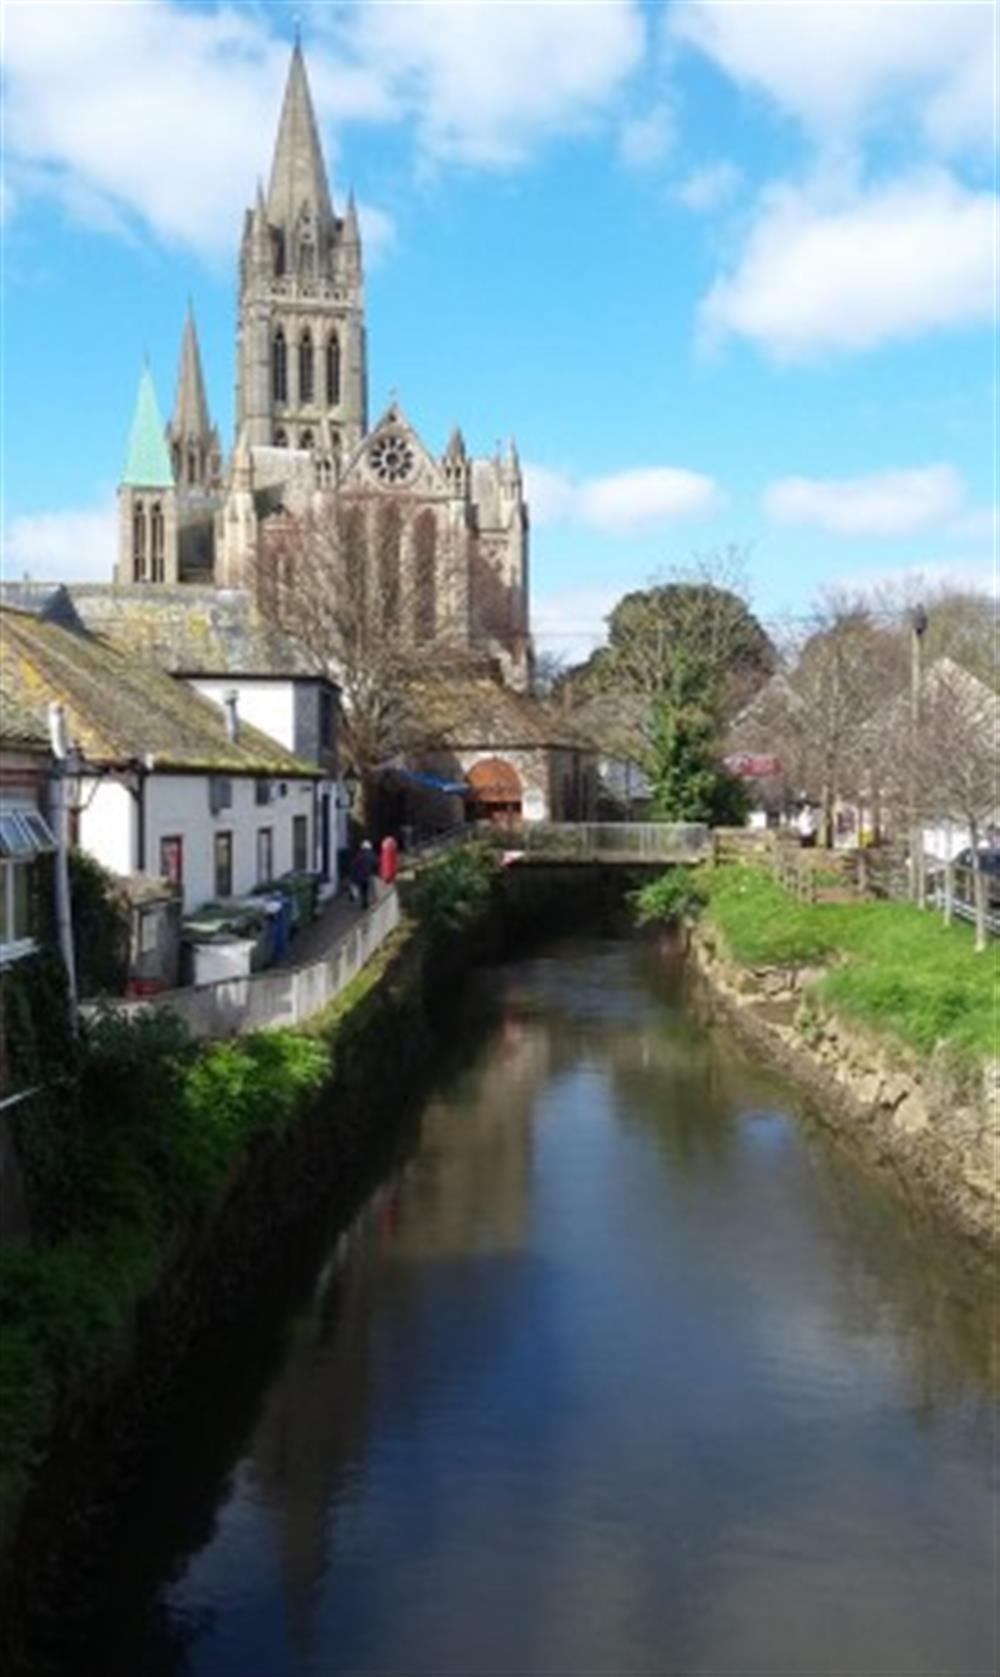 Truro is our main shopping centre. A great choice for restaurants, the cinema or a walk around the beautiful cathedral.